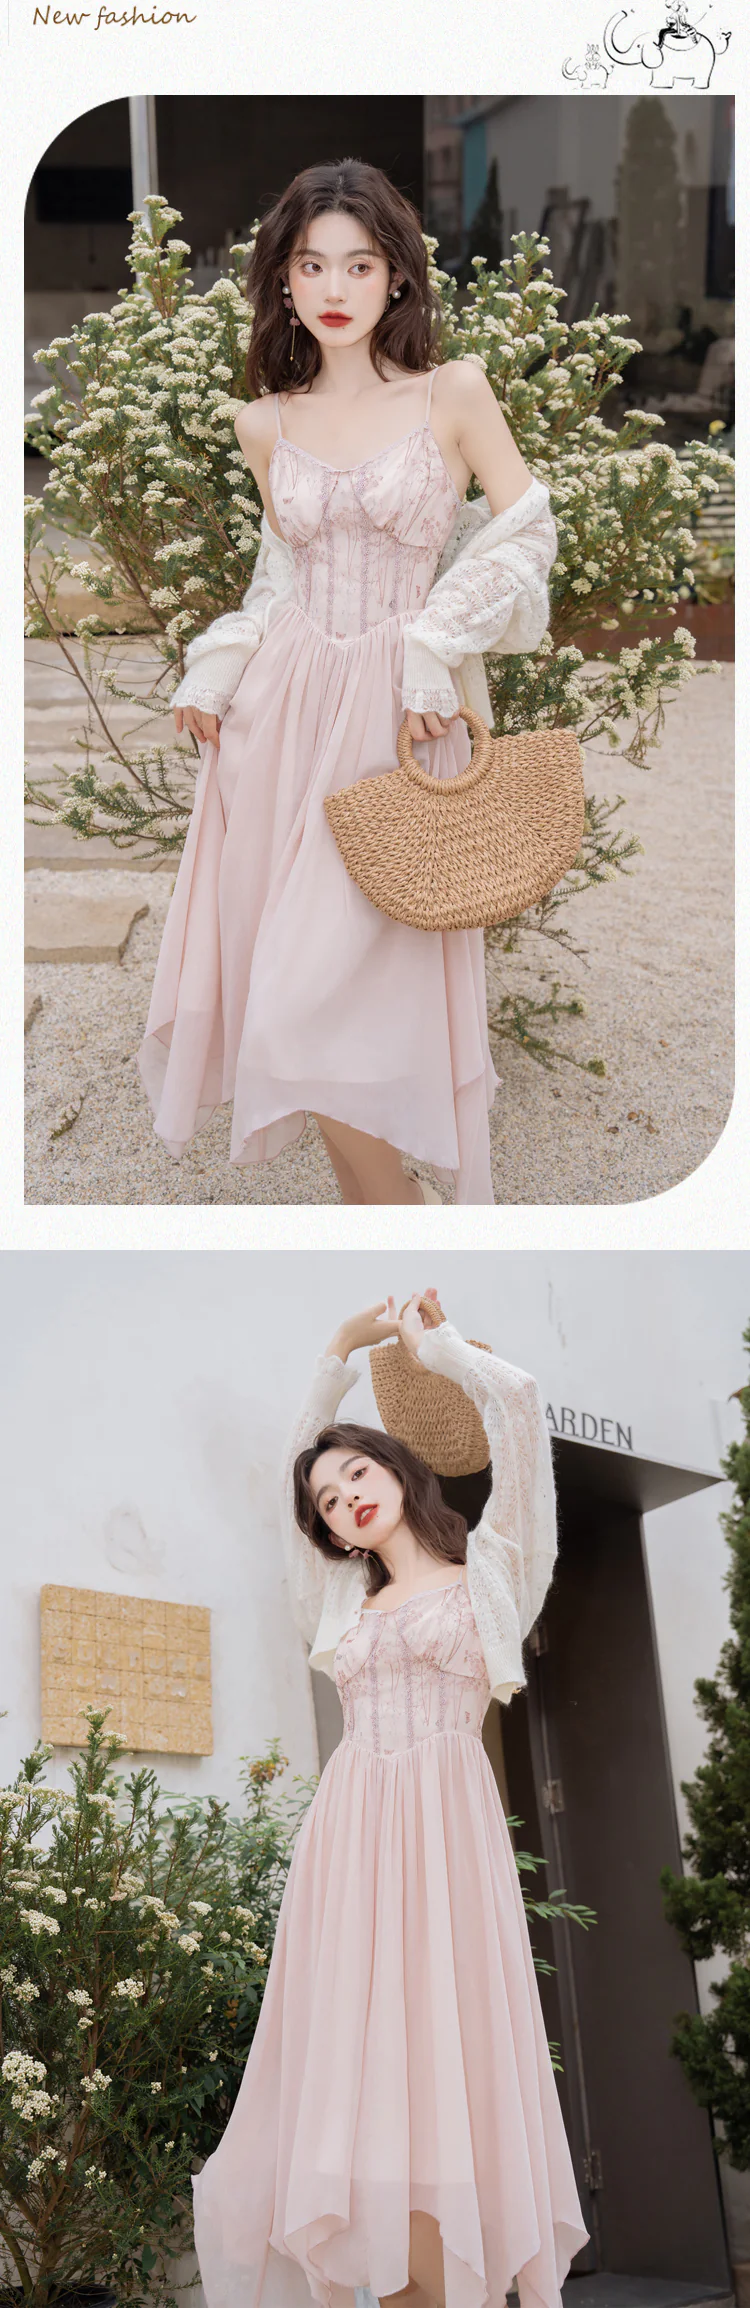 Sweet-Pink-Casual-Slip-Dress-with-Long-Sleeve-Sweater-Cardigan12